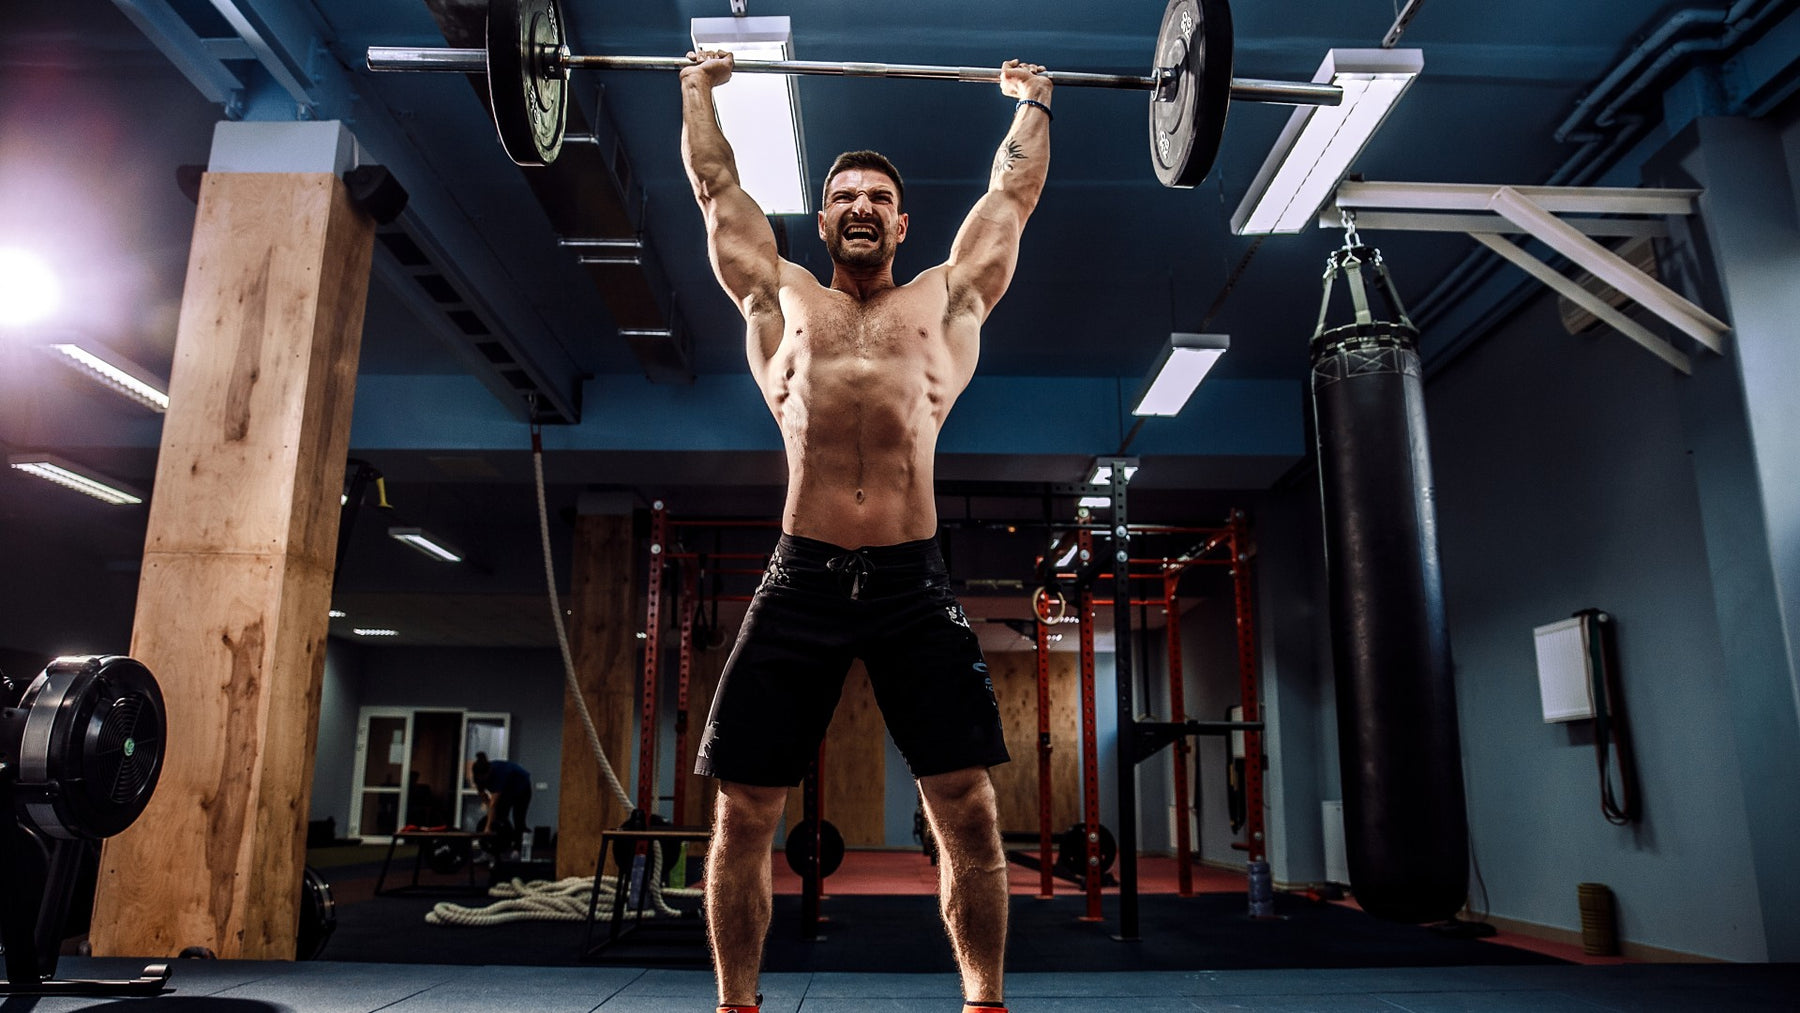 The Best Barbell-Only Home Workout Ever